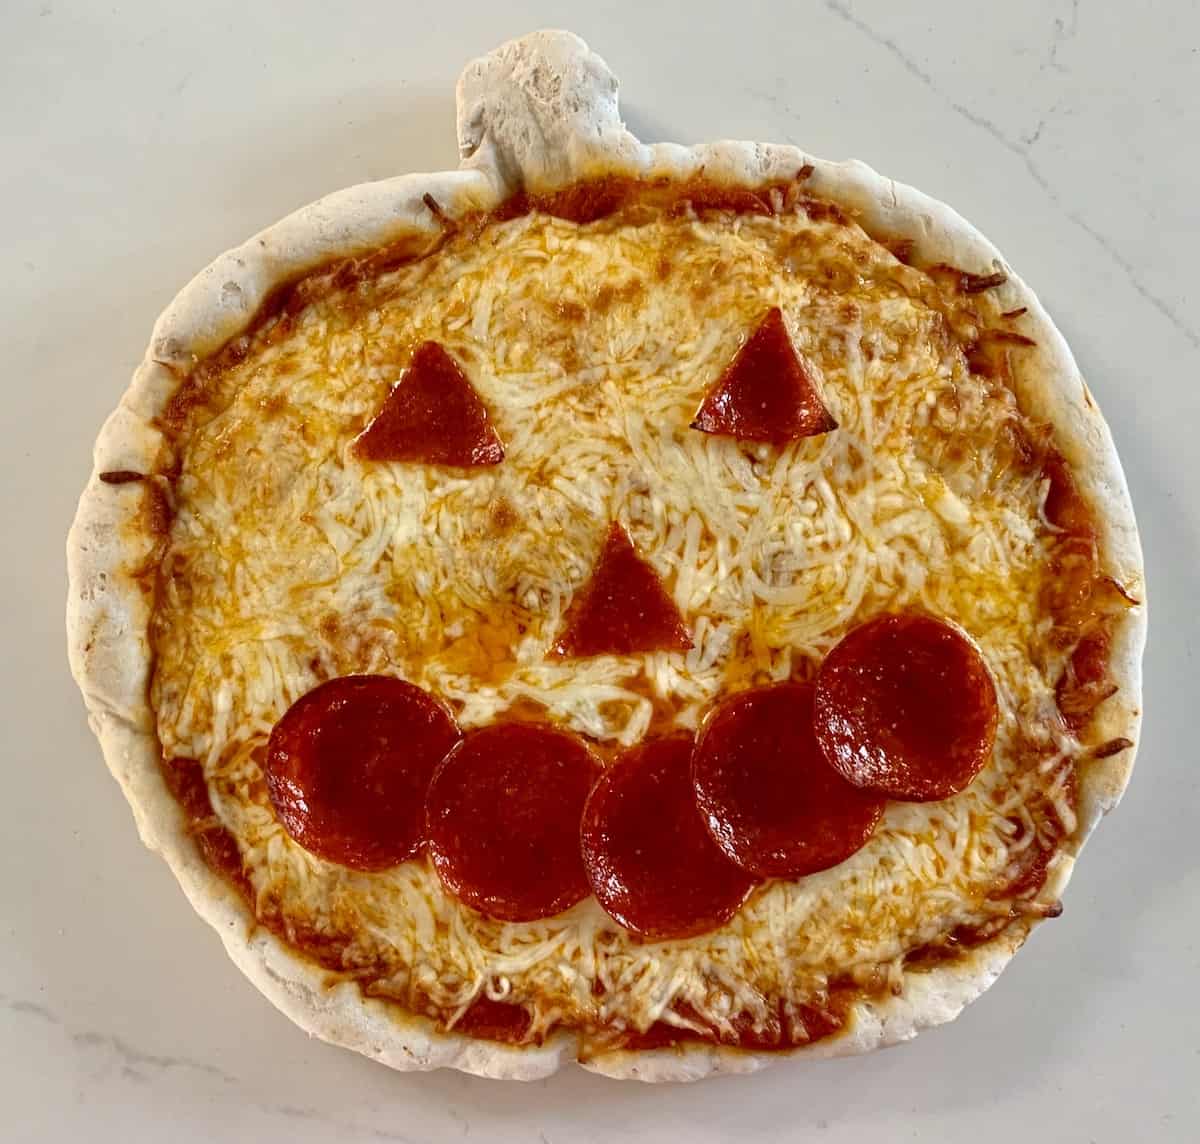 Gluten-free jack-o-lantern pizza,topped with sauce, cheese, and pepperoni triangle eyes and nose and 5 circles shaped into a smile.